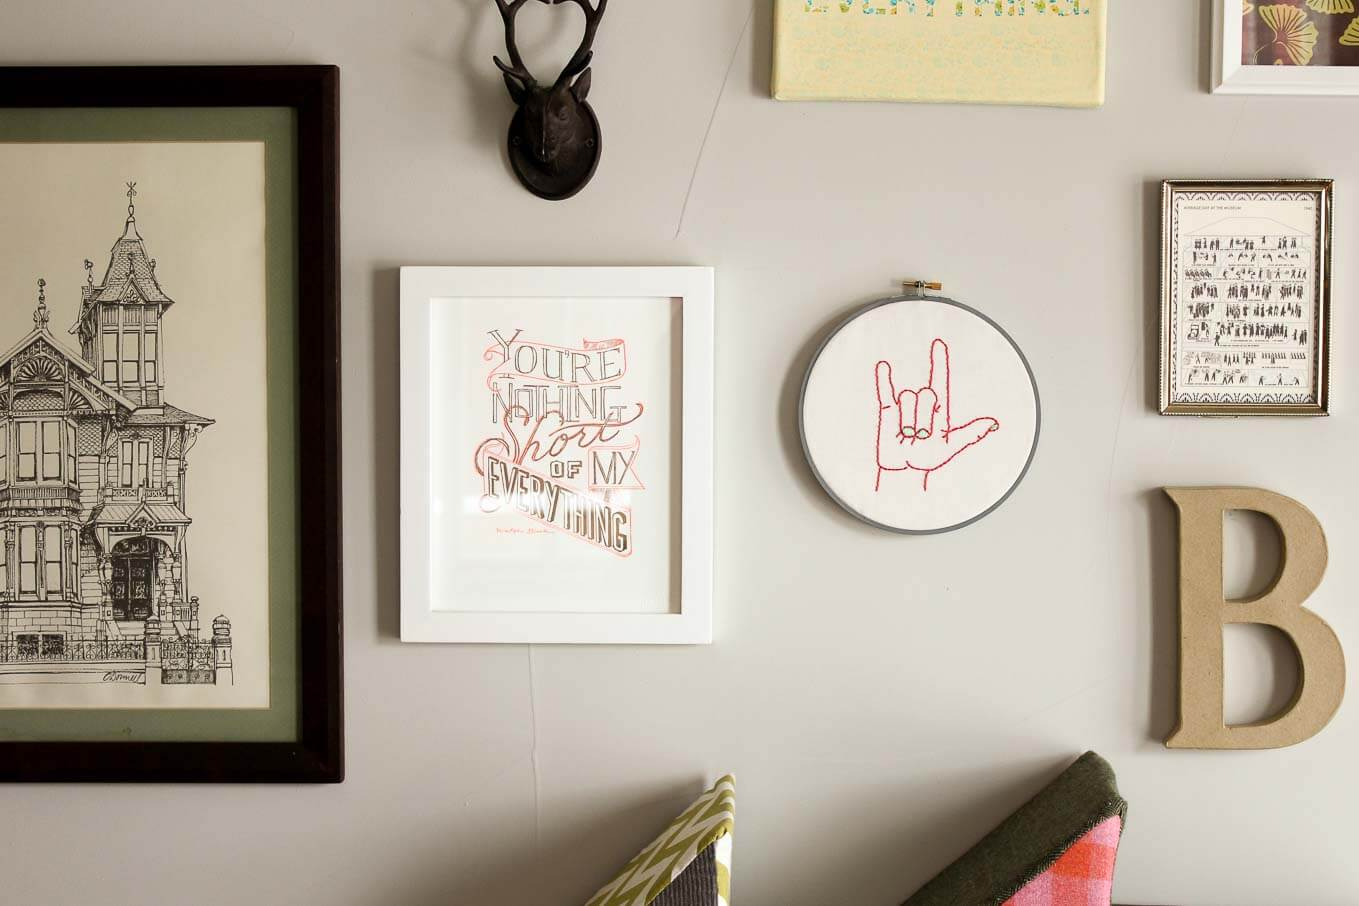 Embroidery On Paper Free Patterns I Love You Free Embroidery Pattern Make Do Crew